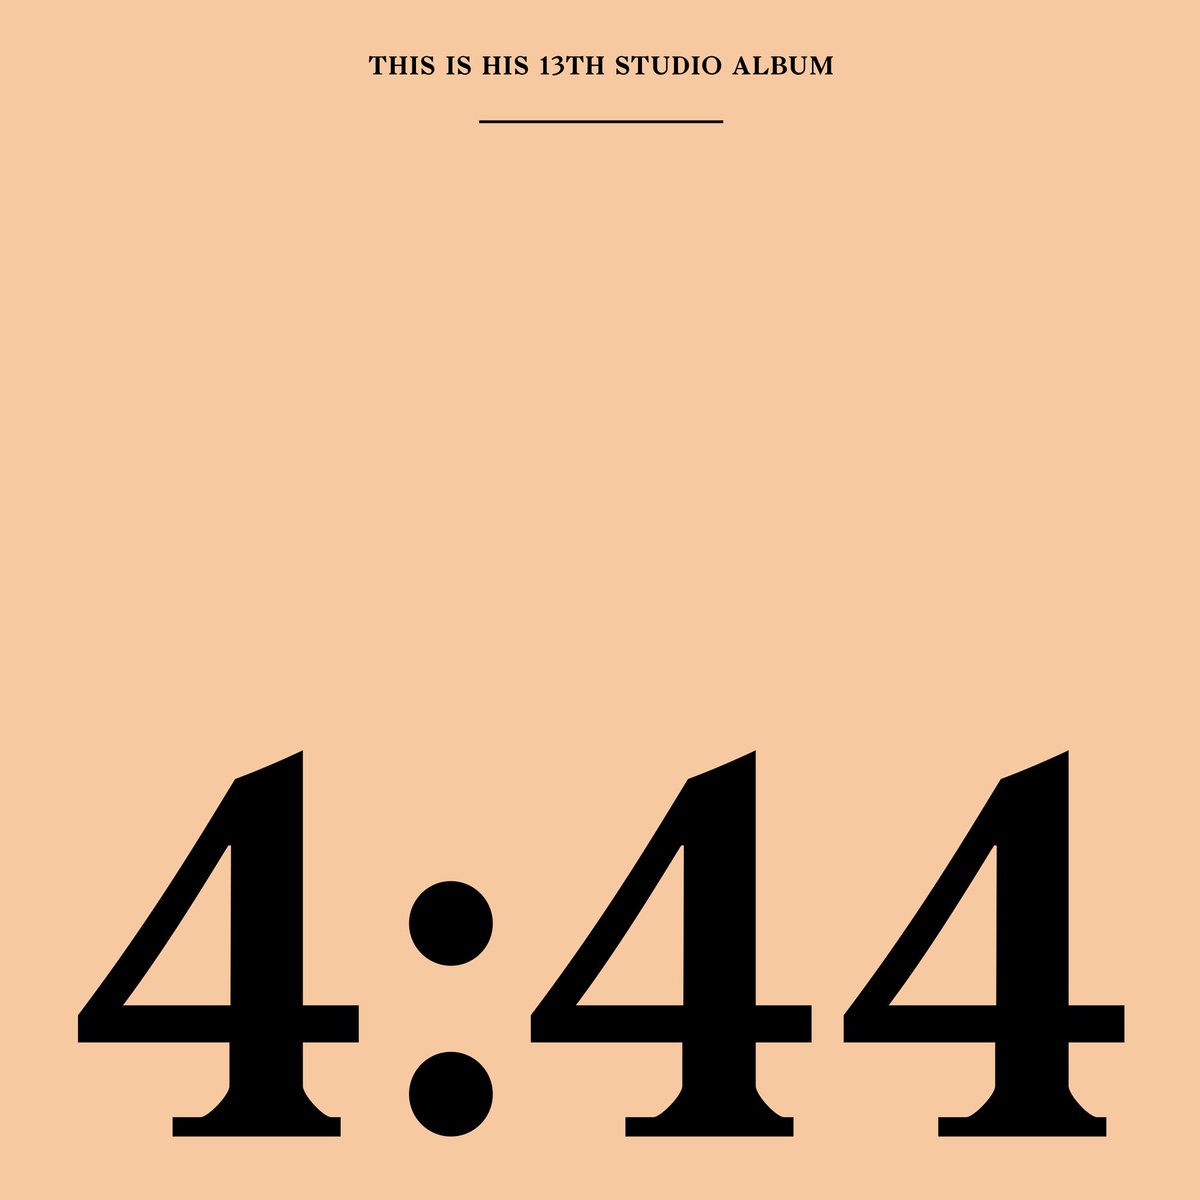 9. 4:44Another return to form for Jay after the disaster that was the predecessor to this album in MCHG, we hear Jay at his most mature and probably at his most focused in messagingFavorite track: marcy me